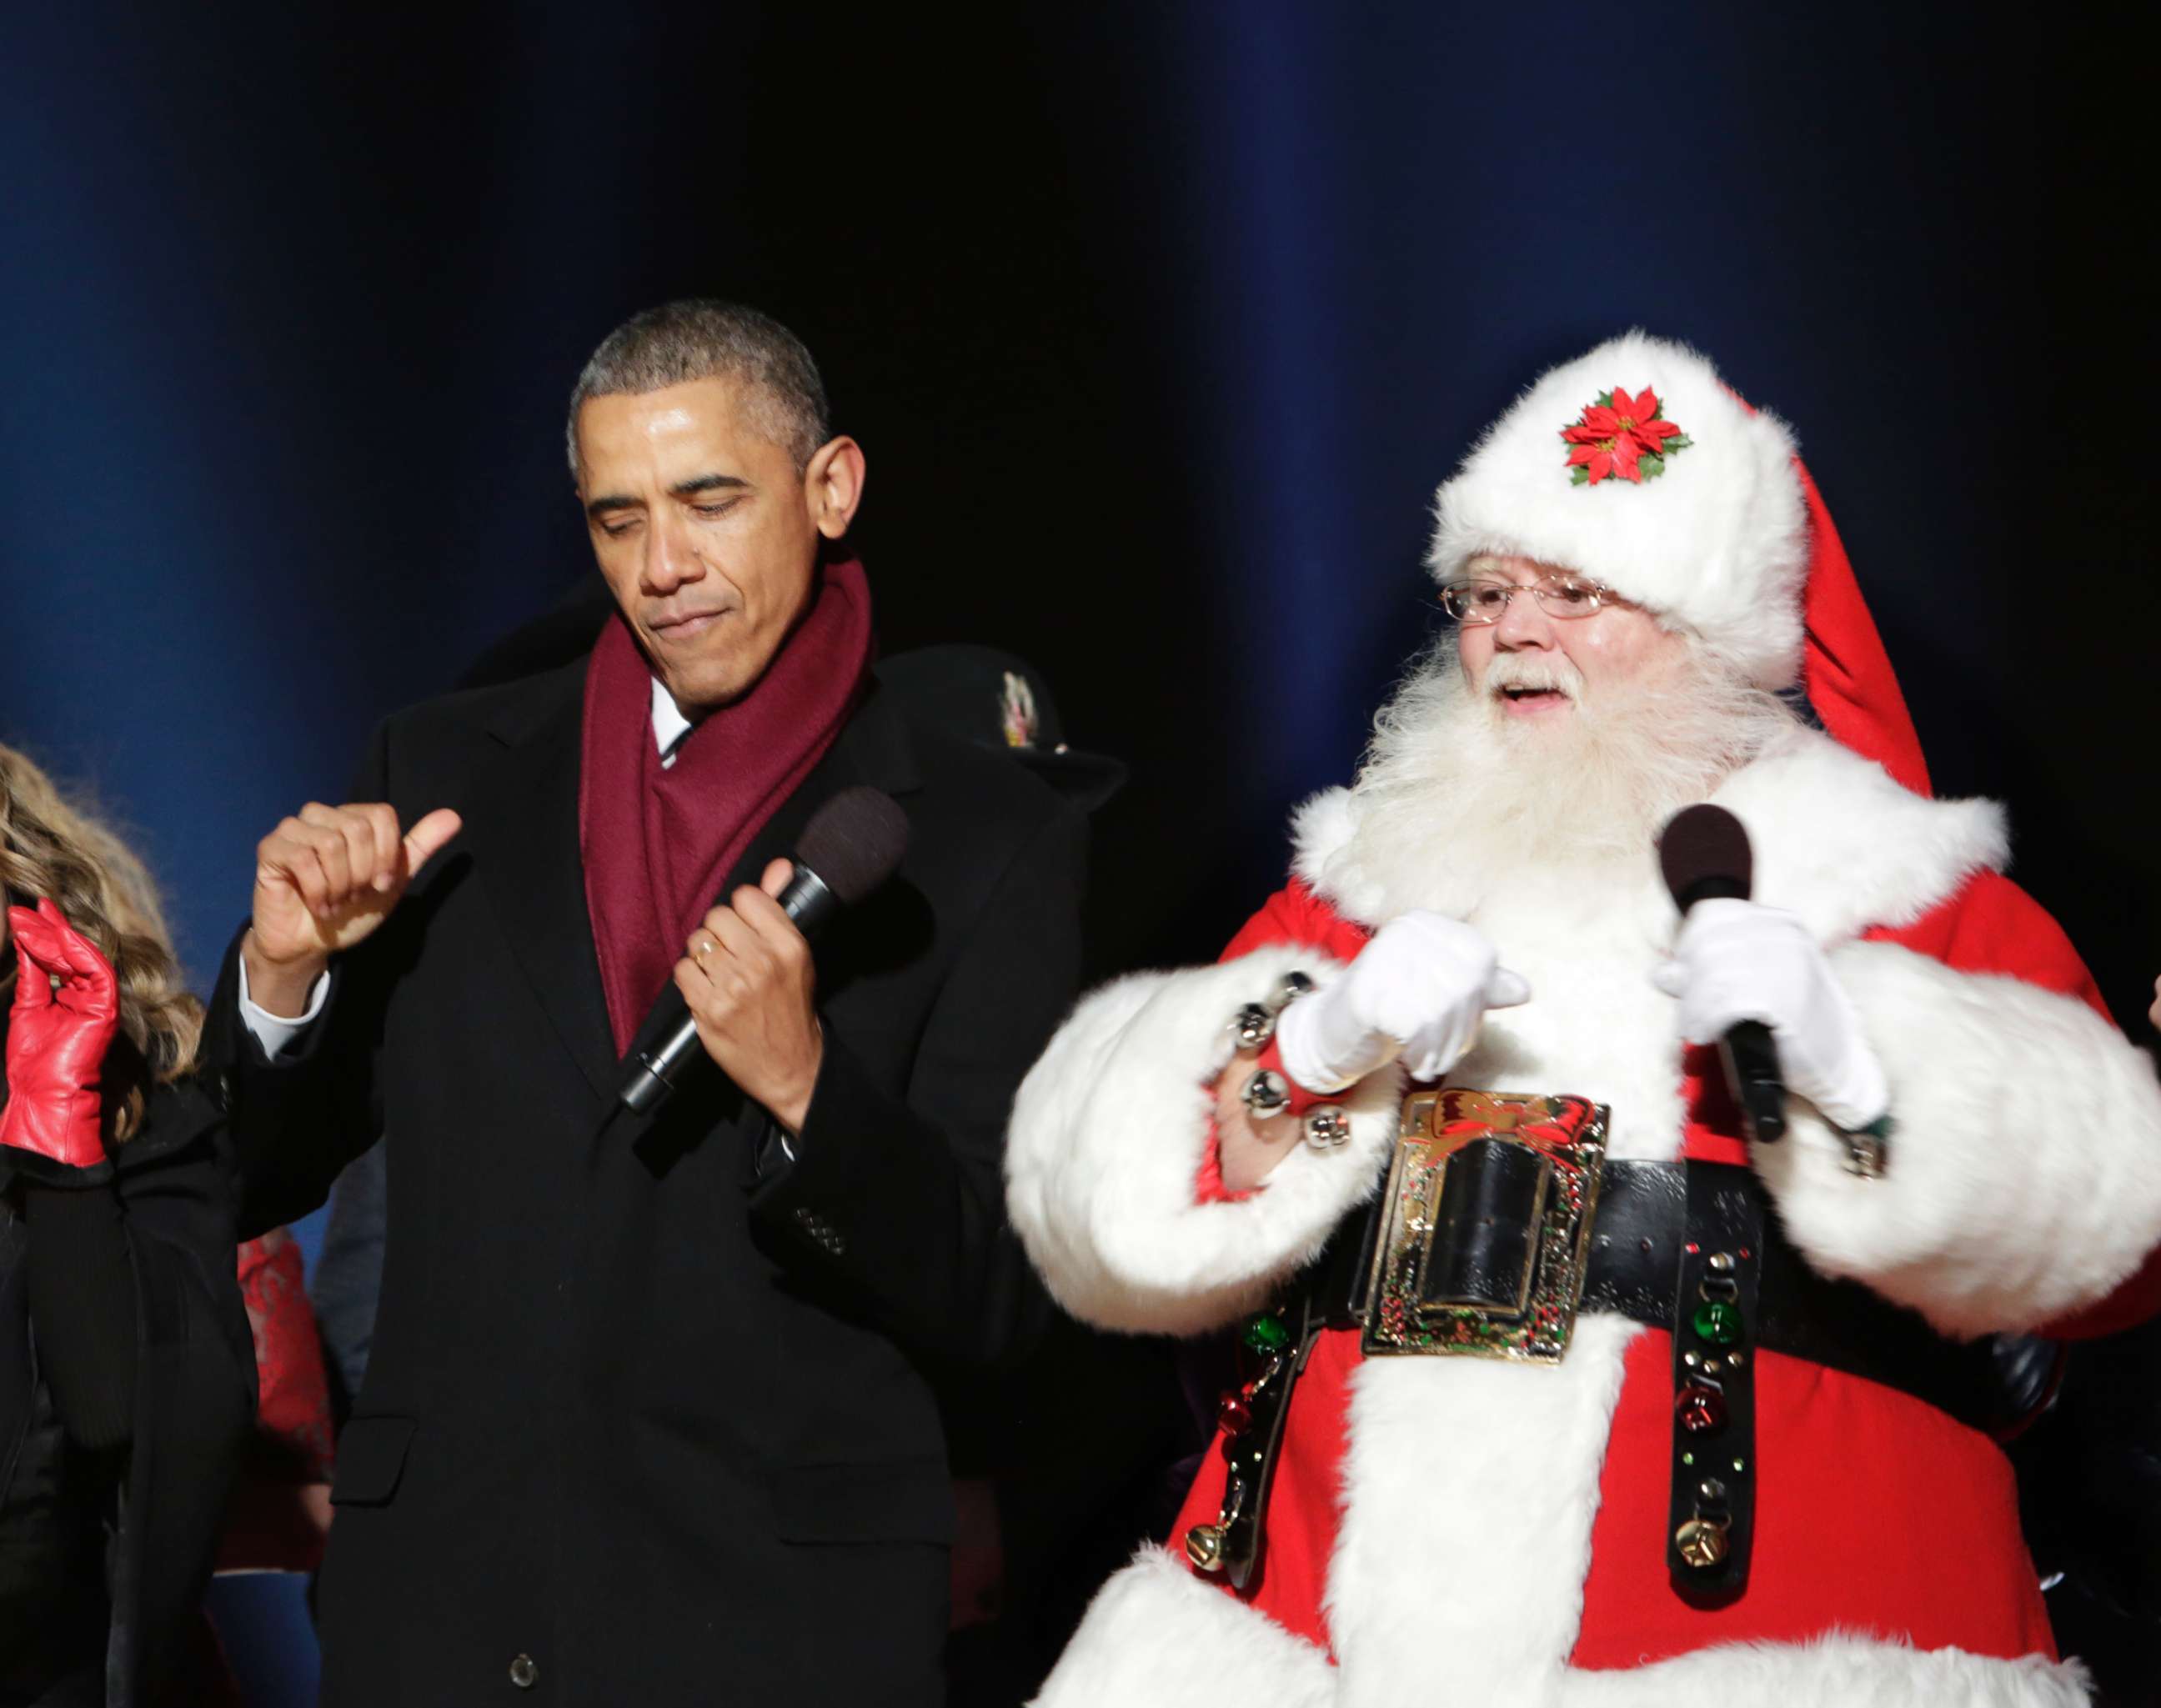 PHOTO: President Barack Obama dances with Santa Claus at the lighting of the National Christmas Tree, Dec. 4, 2014 in Washington.